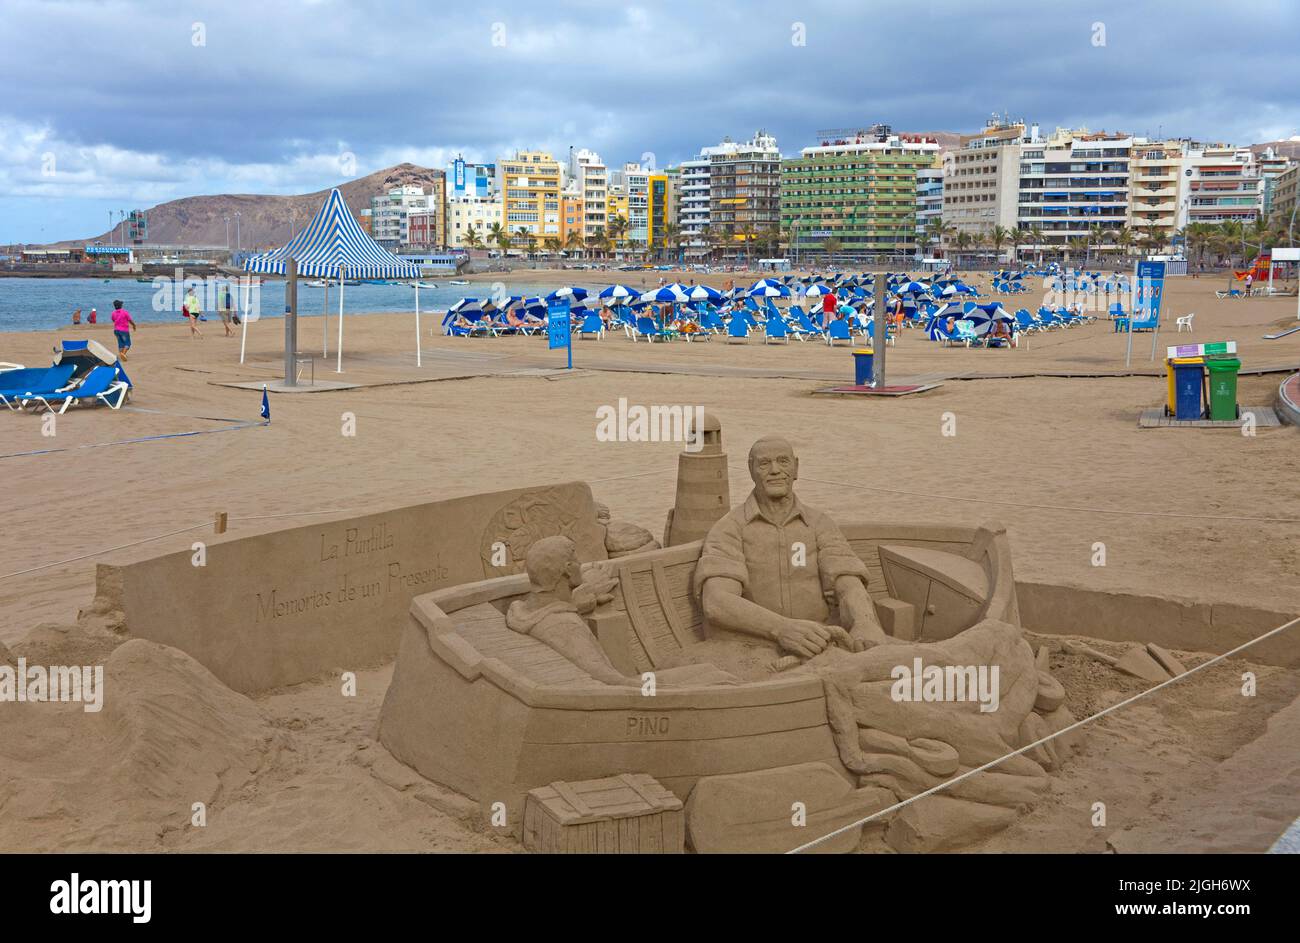 Sand art, fishermen in a fishing boat made with sand, Playa de las Canteras, town beach of Las Palmas, Grand Canary, Canary islands, Spain, Europe Stock Photo